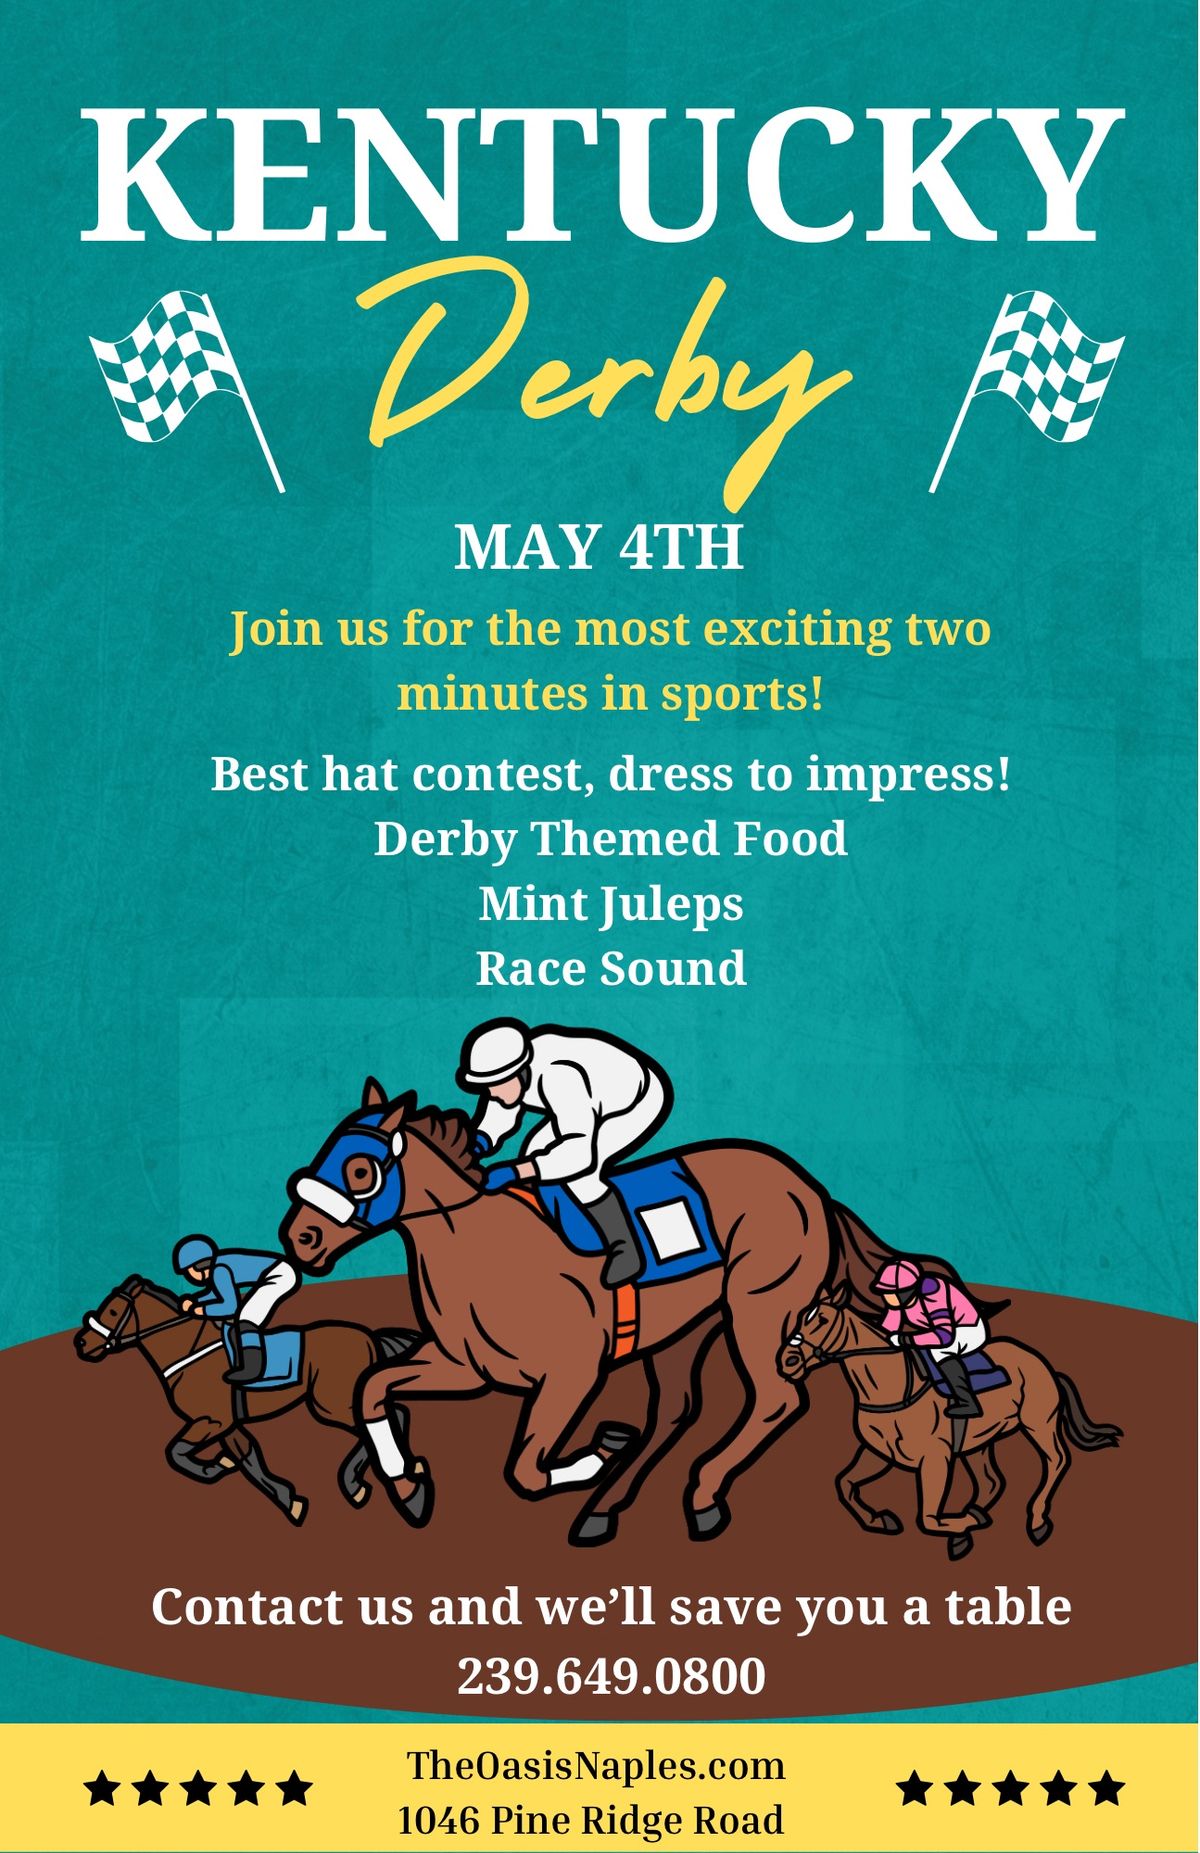 Kentucky Derby Party @ The Oasis